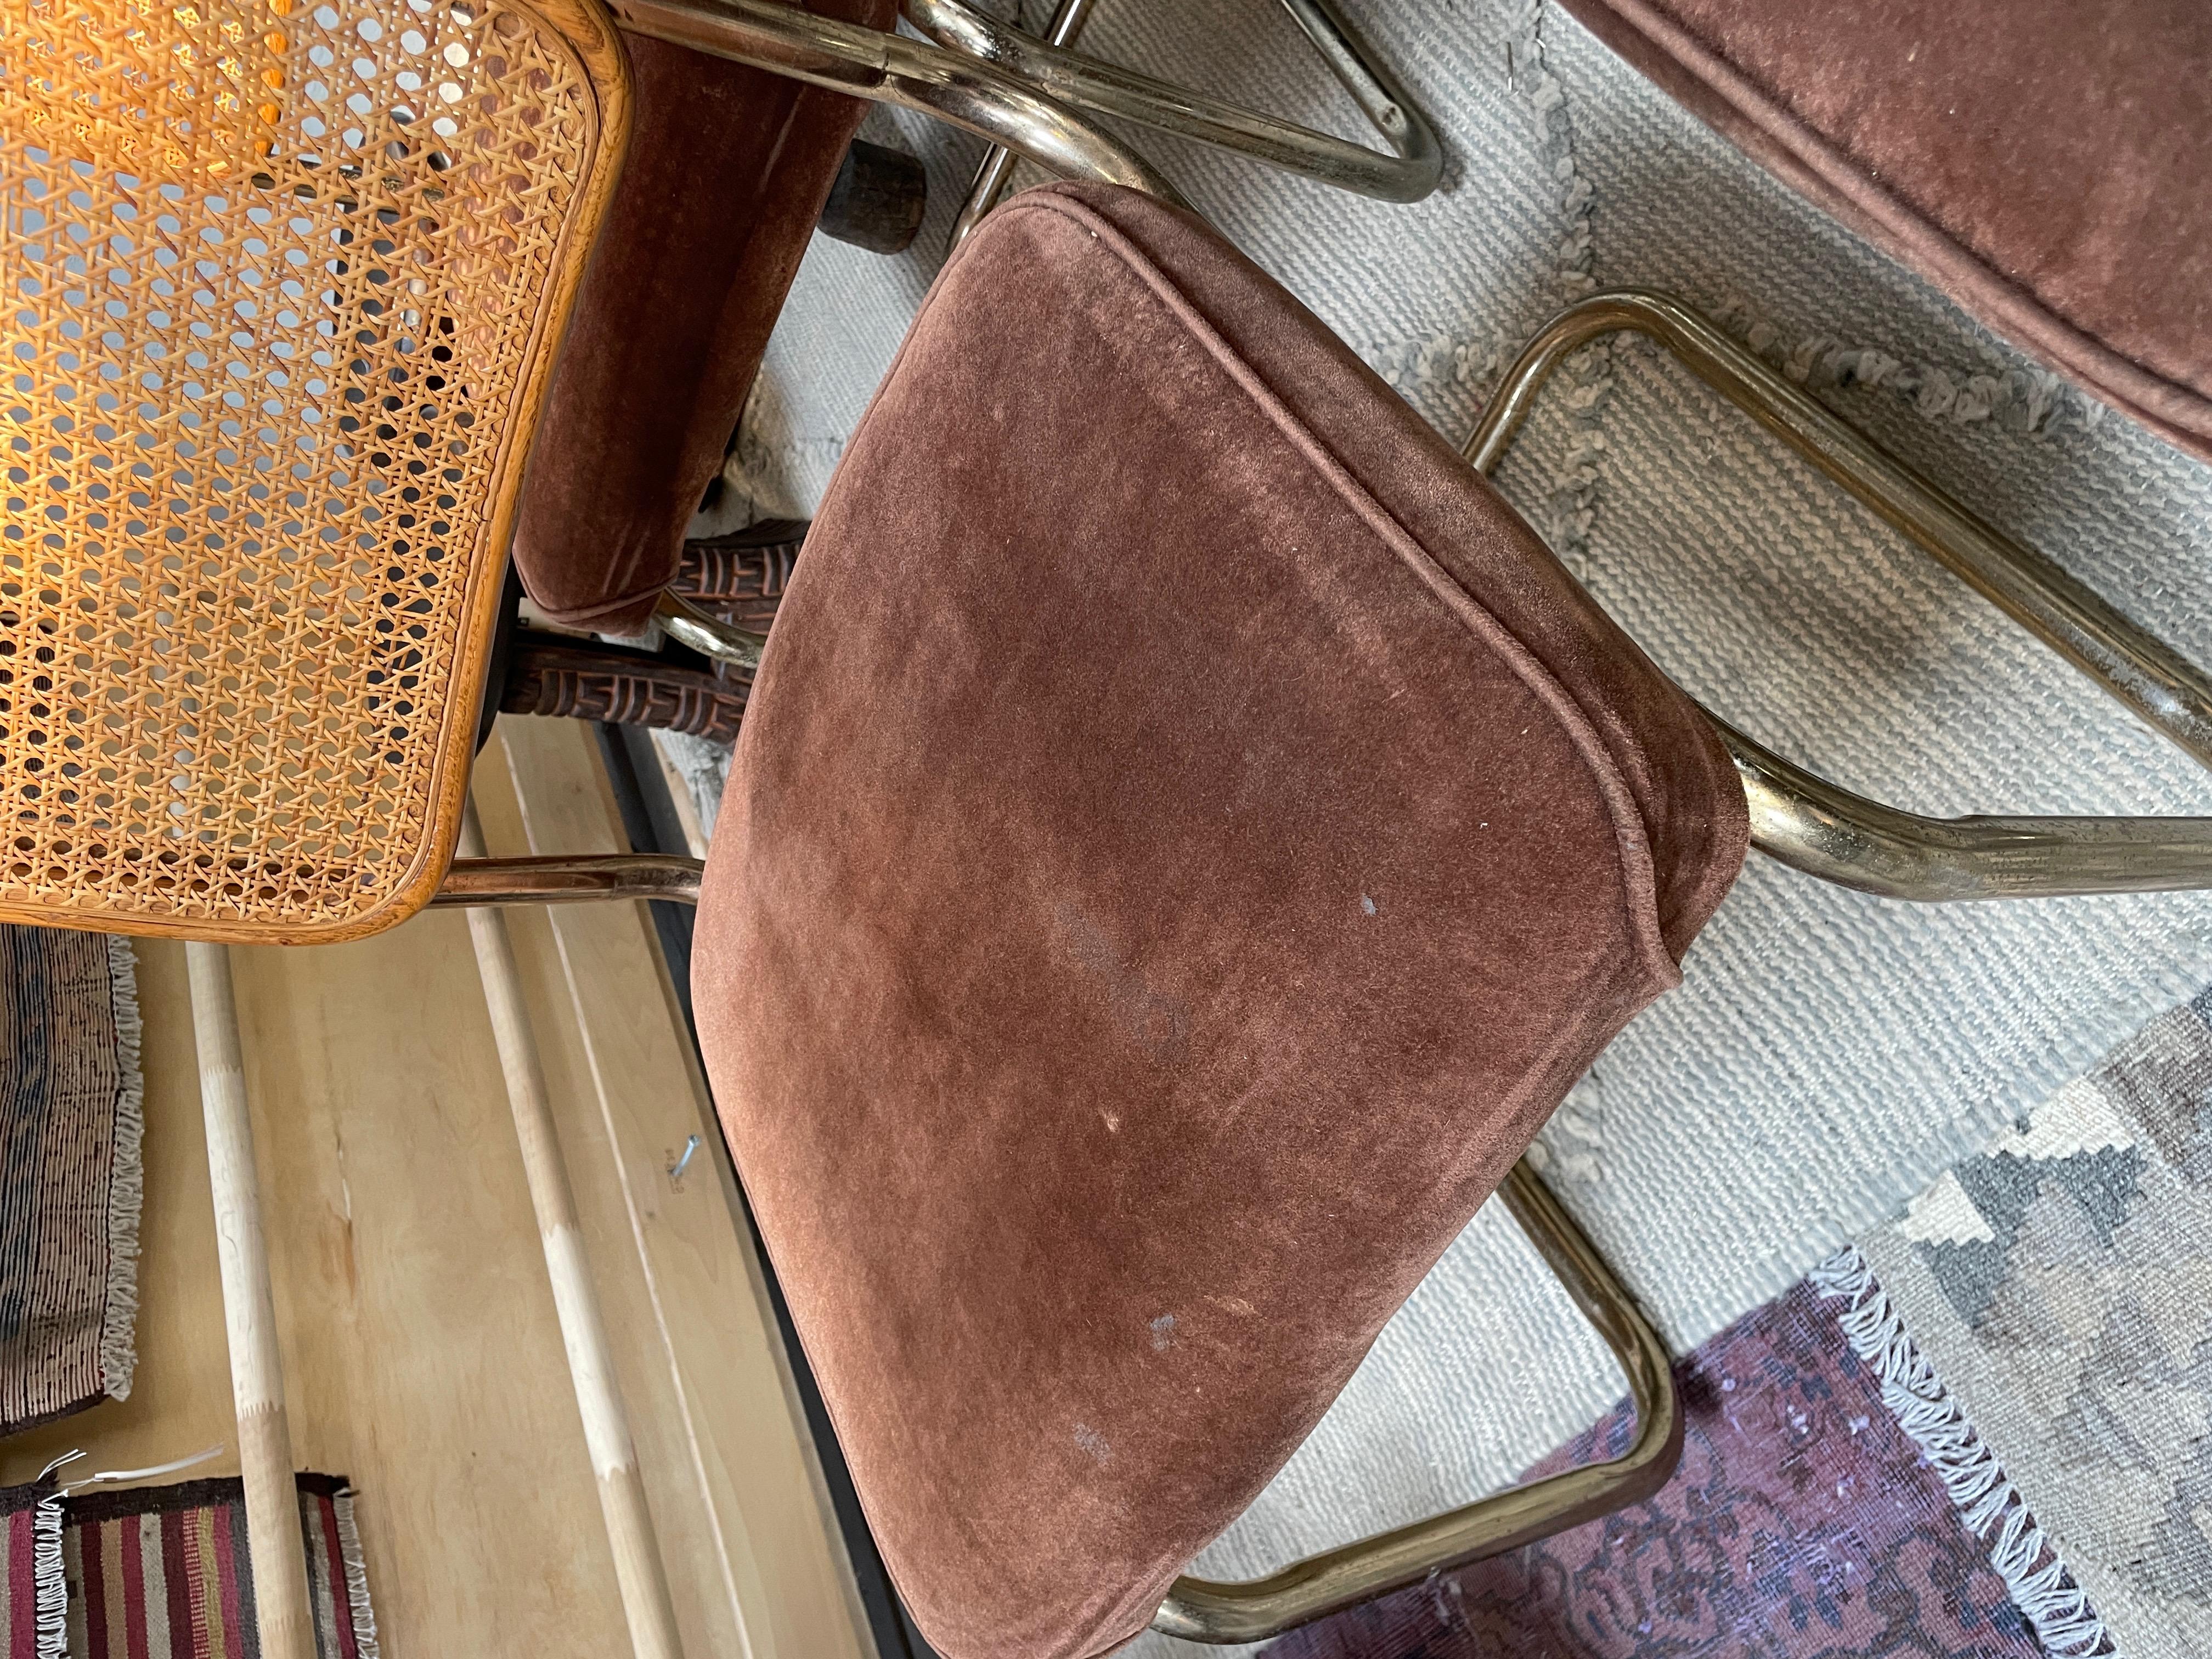 Cesca inspired dining chairs. These are vintage with cane backs and metal frames they have some staining to the velvet upholstery along with vintage wear. They go beautifully with virtually any table and a variety of design esthetics.